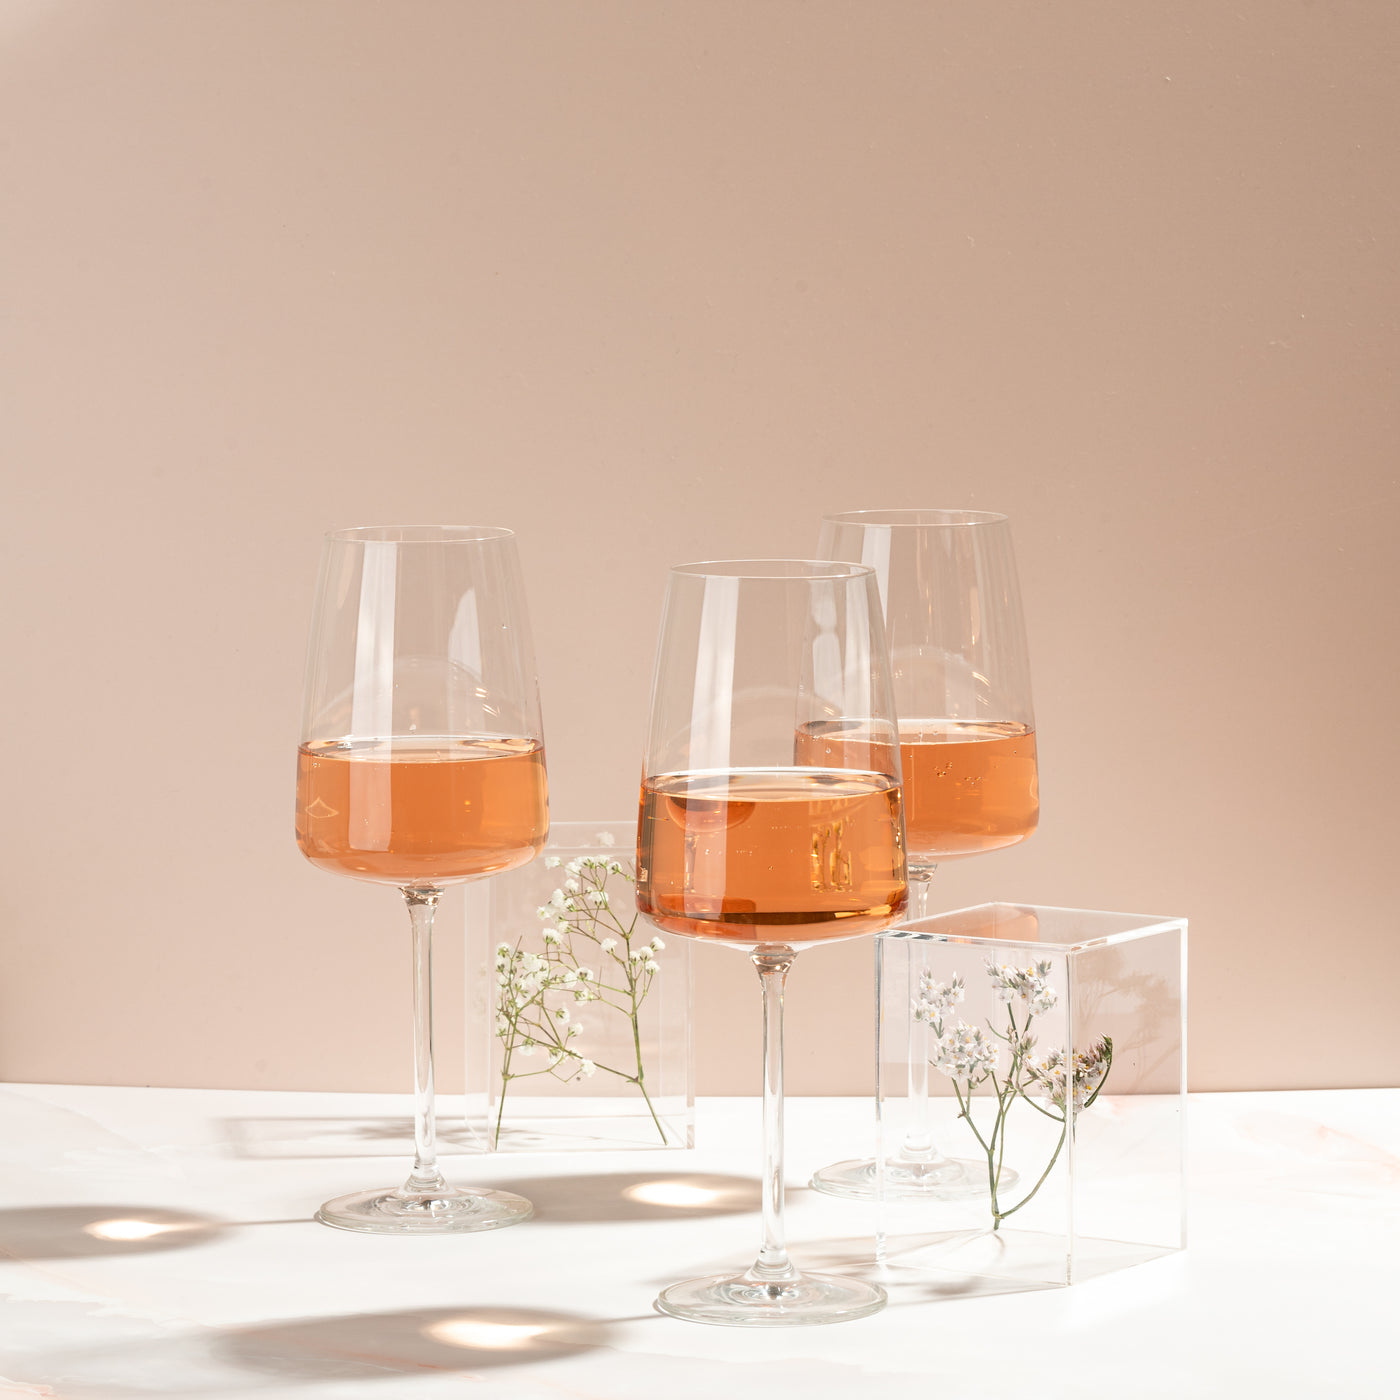 Champagne pink and marble photography backdrop for food and product photography. Available in vinyl backdrops and board backdrops